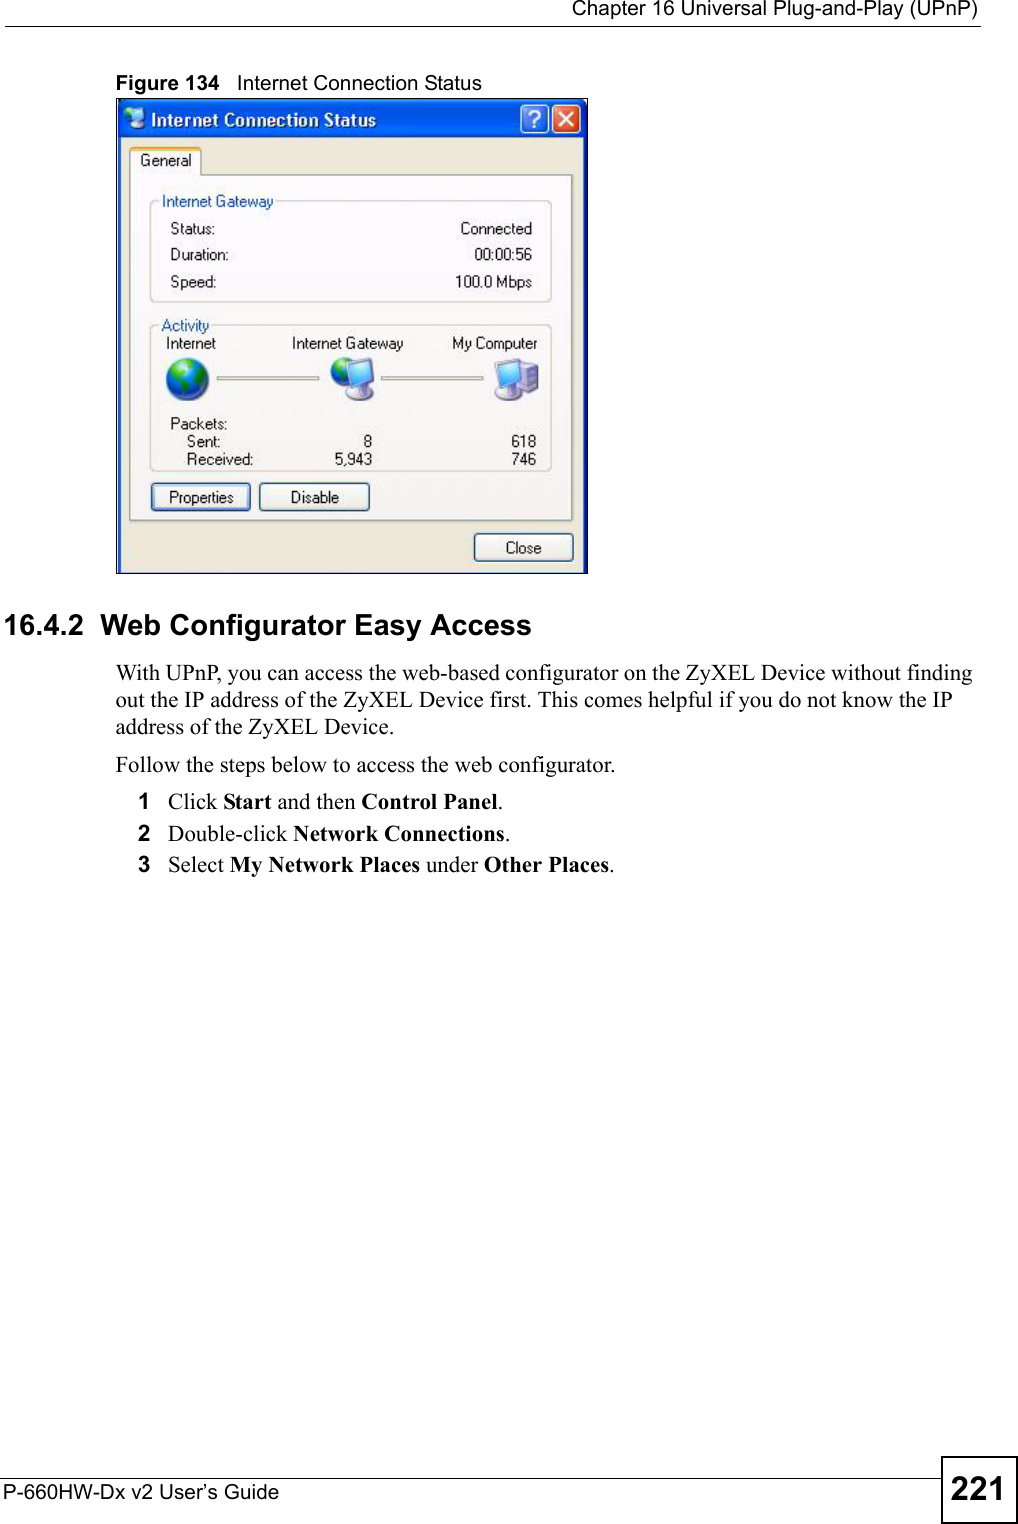  Chapter 16 Universal Plug-and-Play (UPnP)P-660HW-Dx v2 User’s Guide 221Figure 134   Internet Connection Status   16.4.2  Web Configurator Easy AccessWith UPnP, you can access the web-based configurator on the ZyXEL Device without finding out the IP address of the ZyXEL Device first. This comes helpful if you do not know the IP address of the ZyXEL Device.Follow the steps below to access the web configurator.1Click Start and then Control Panel. 2Double-click Network Connections. 3Select My Network Places under Other Places. 